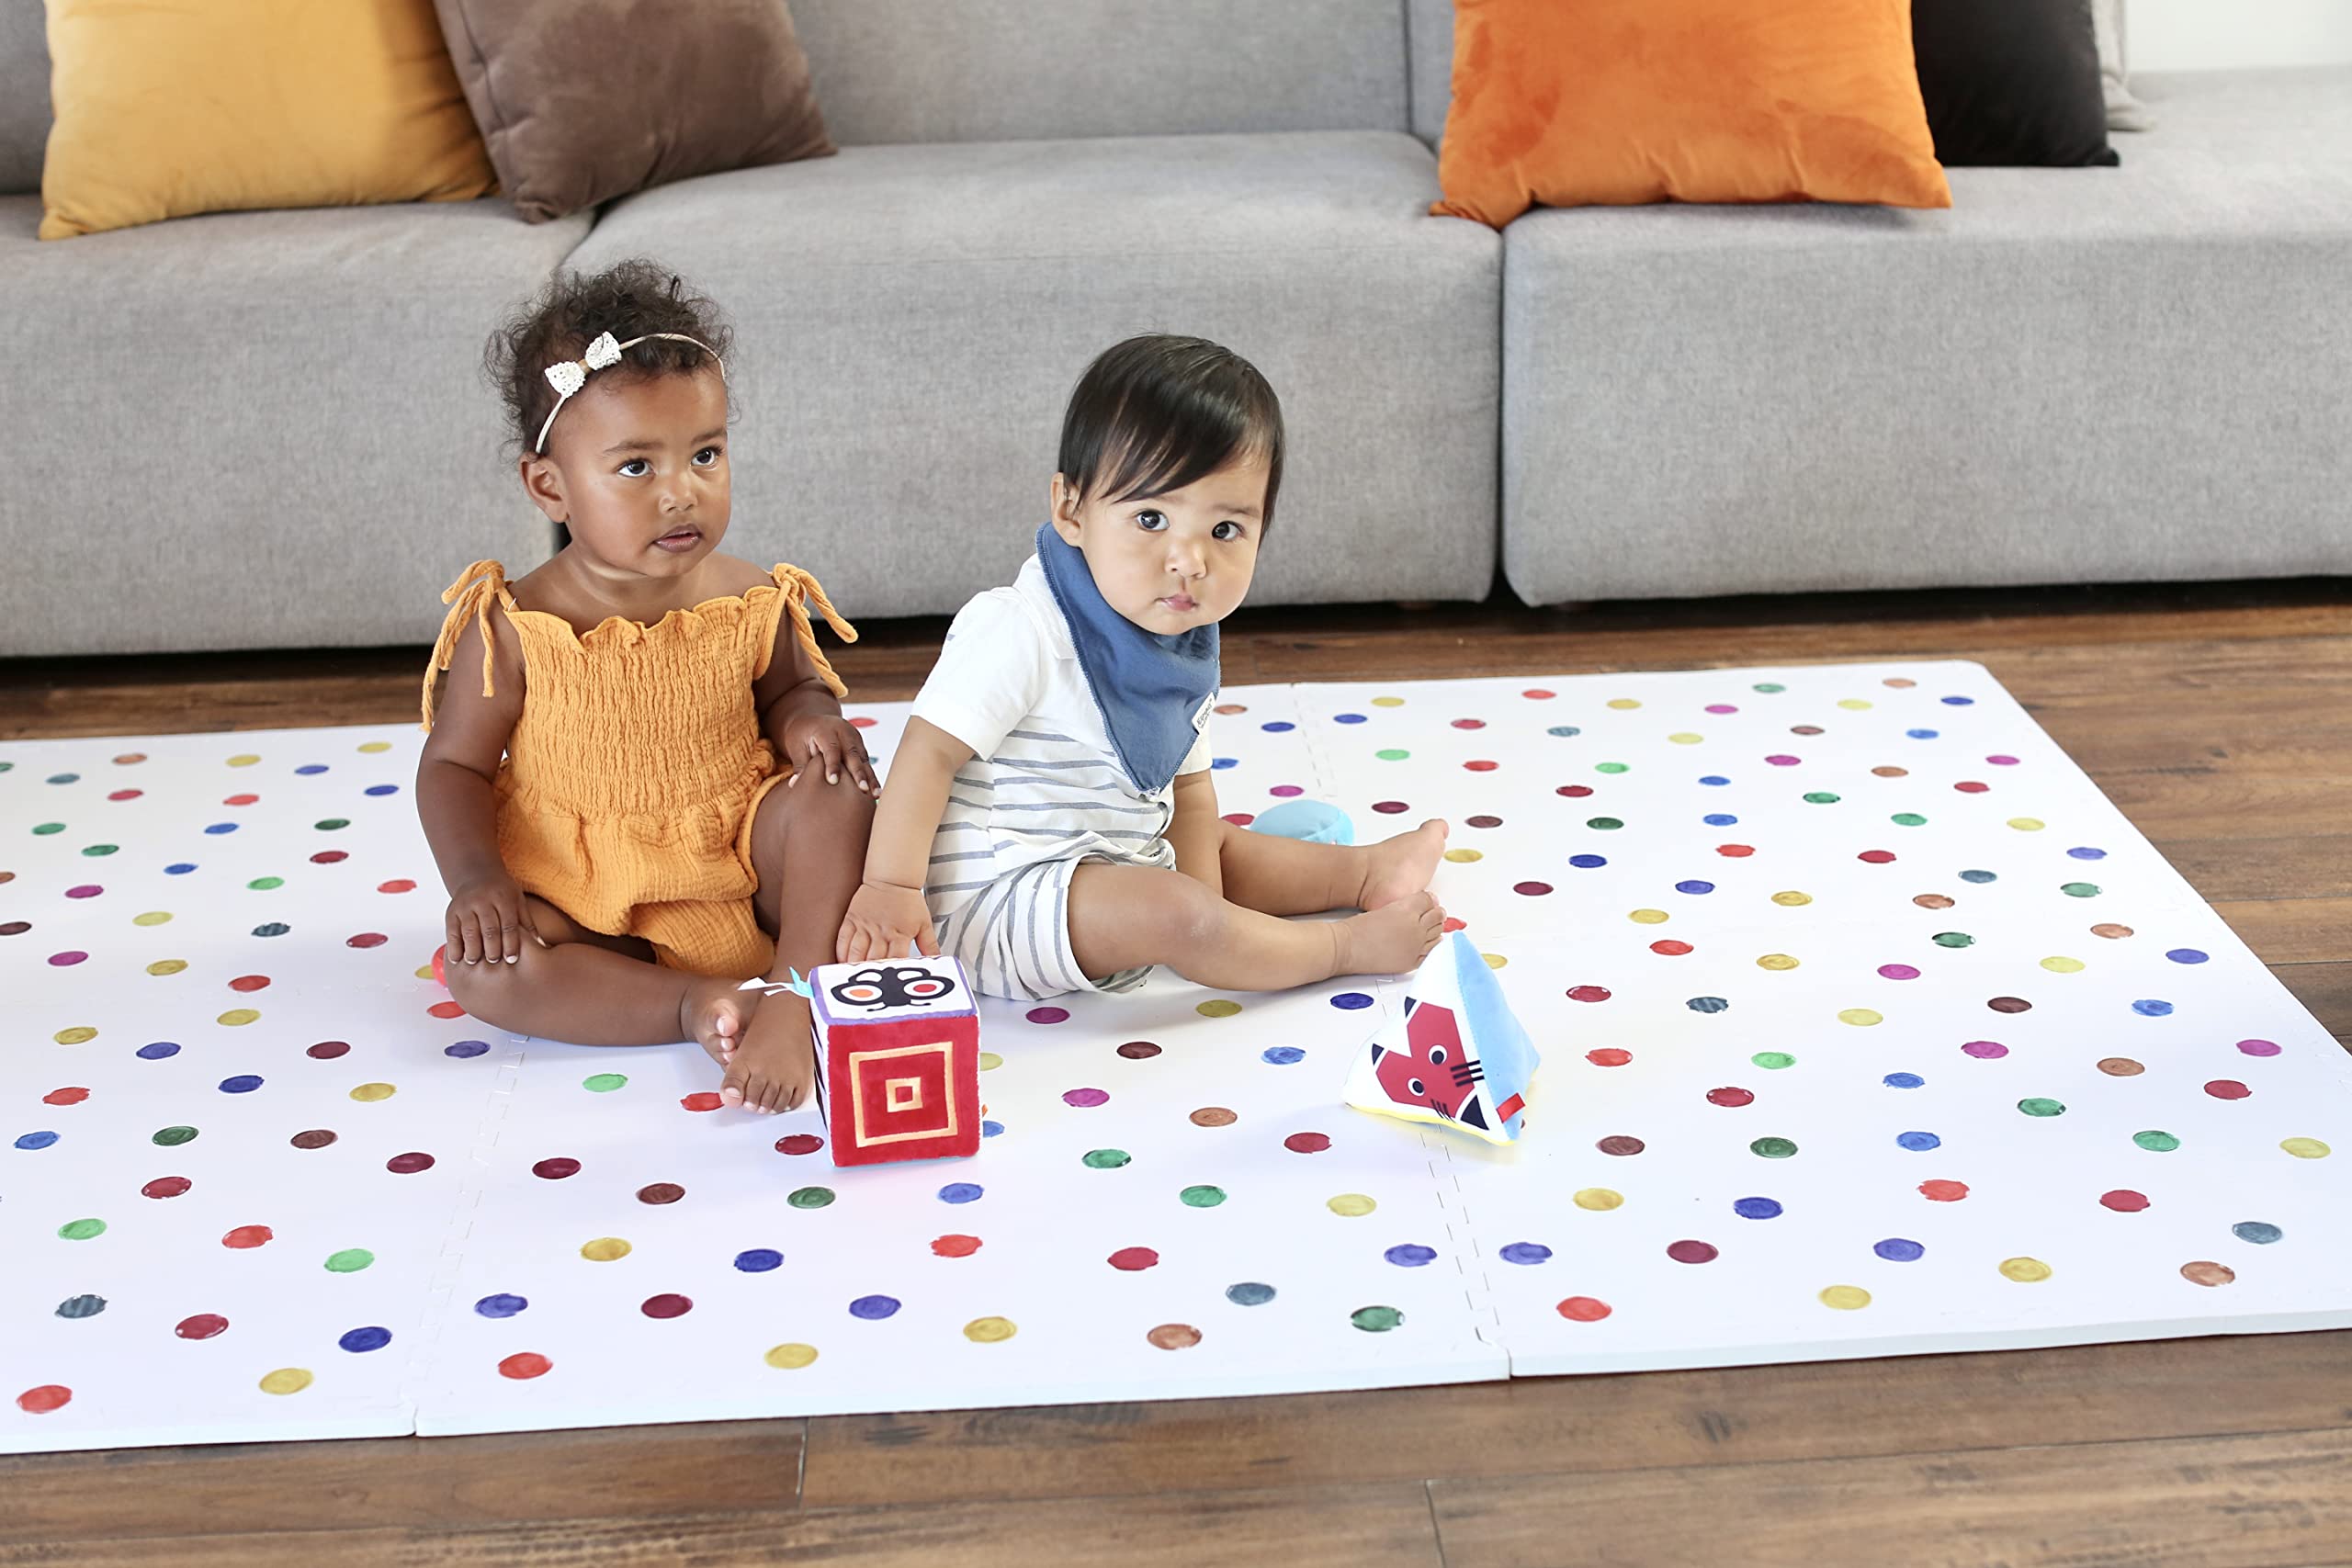 Yay Mats Stylish Extra Large Baby Play Mat. Soft, Thick, Non-Toxic Foam Covers 6 ft x 4 ft. Expandable Tiles with Edges Infants and Kids Playmat Tummy Time Mat (Cassia Polka Dot)